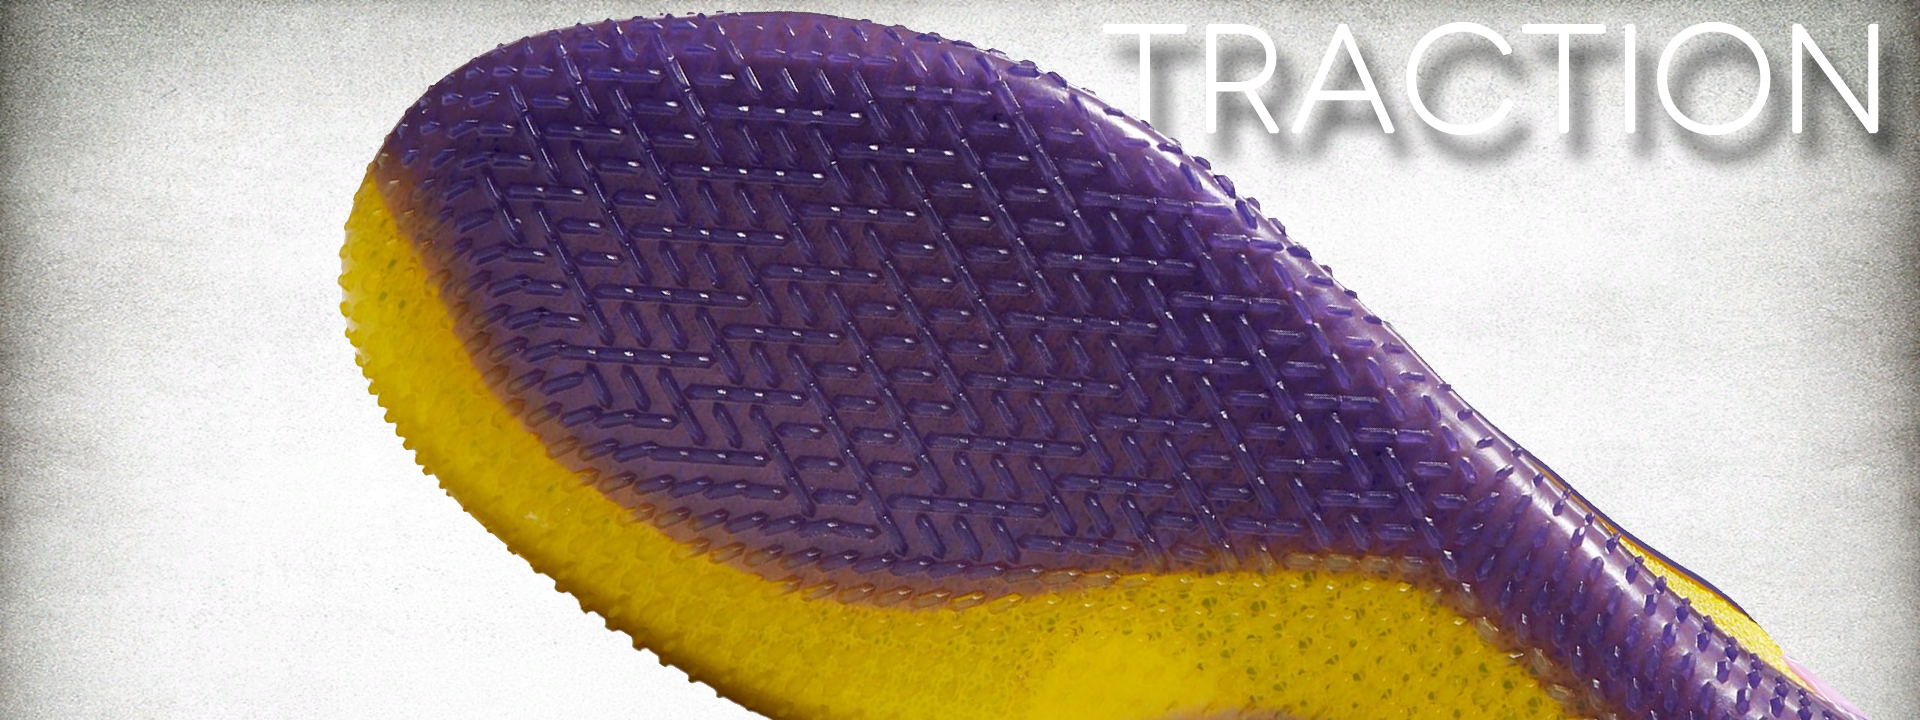 Nike Kobe NXT 360 performance review traction